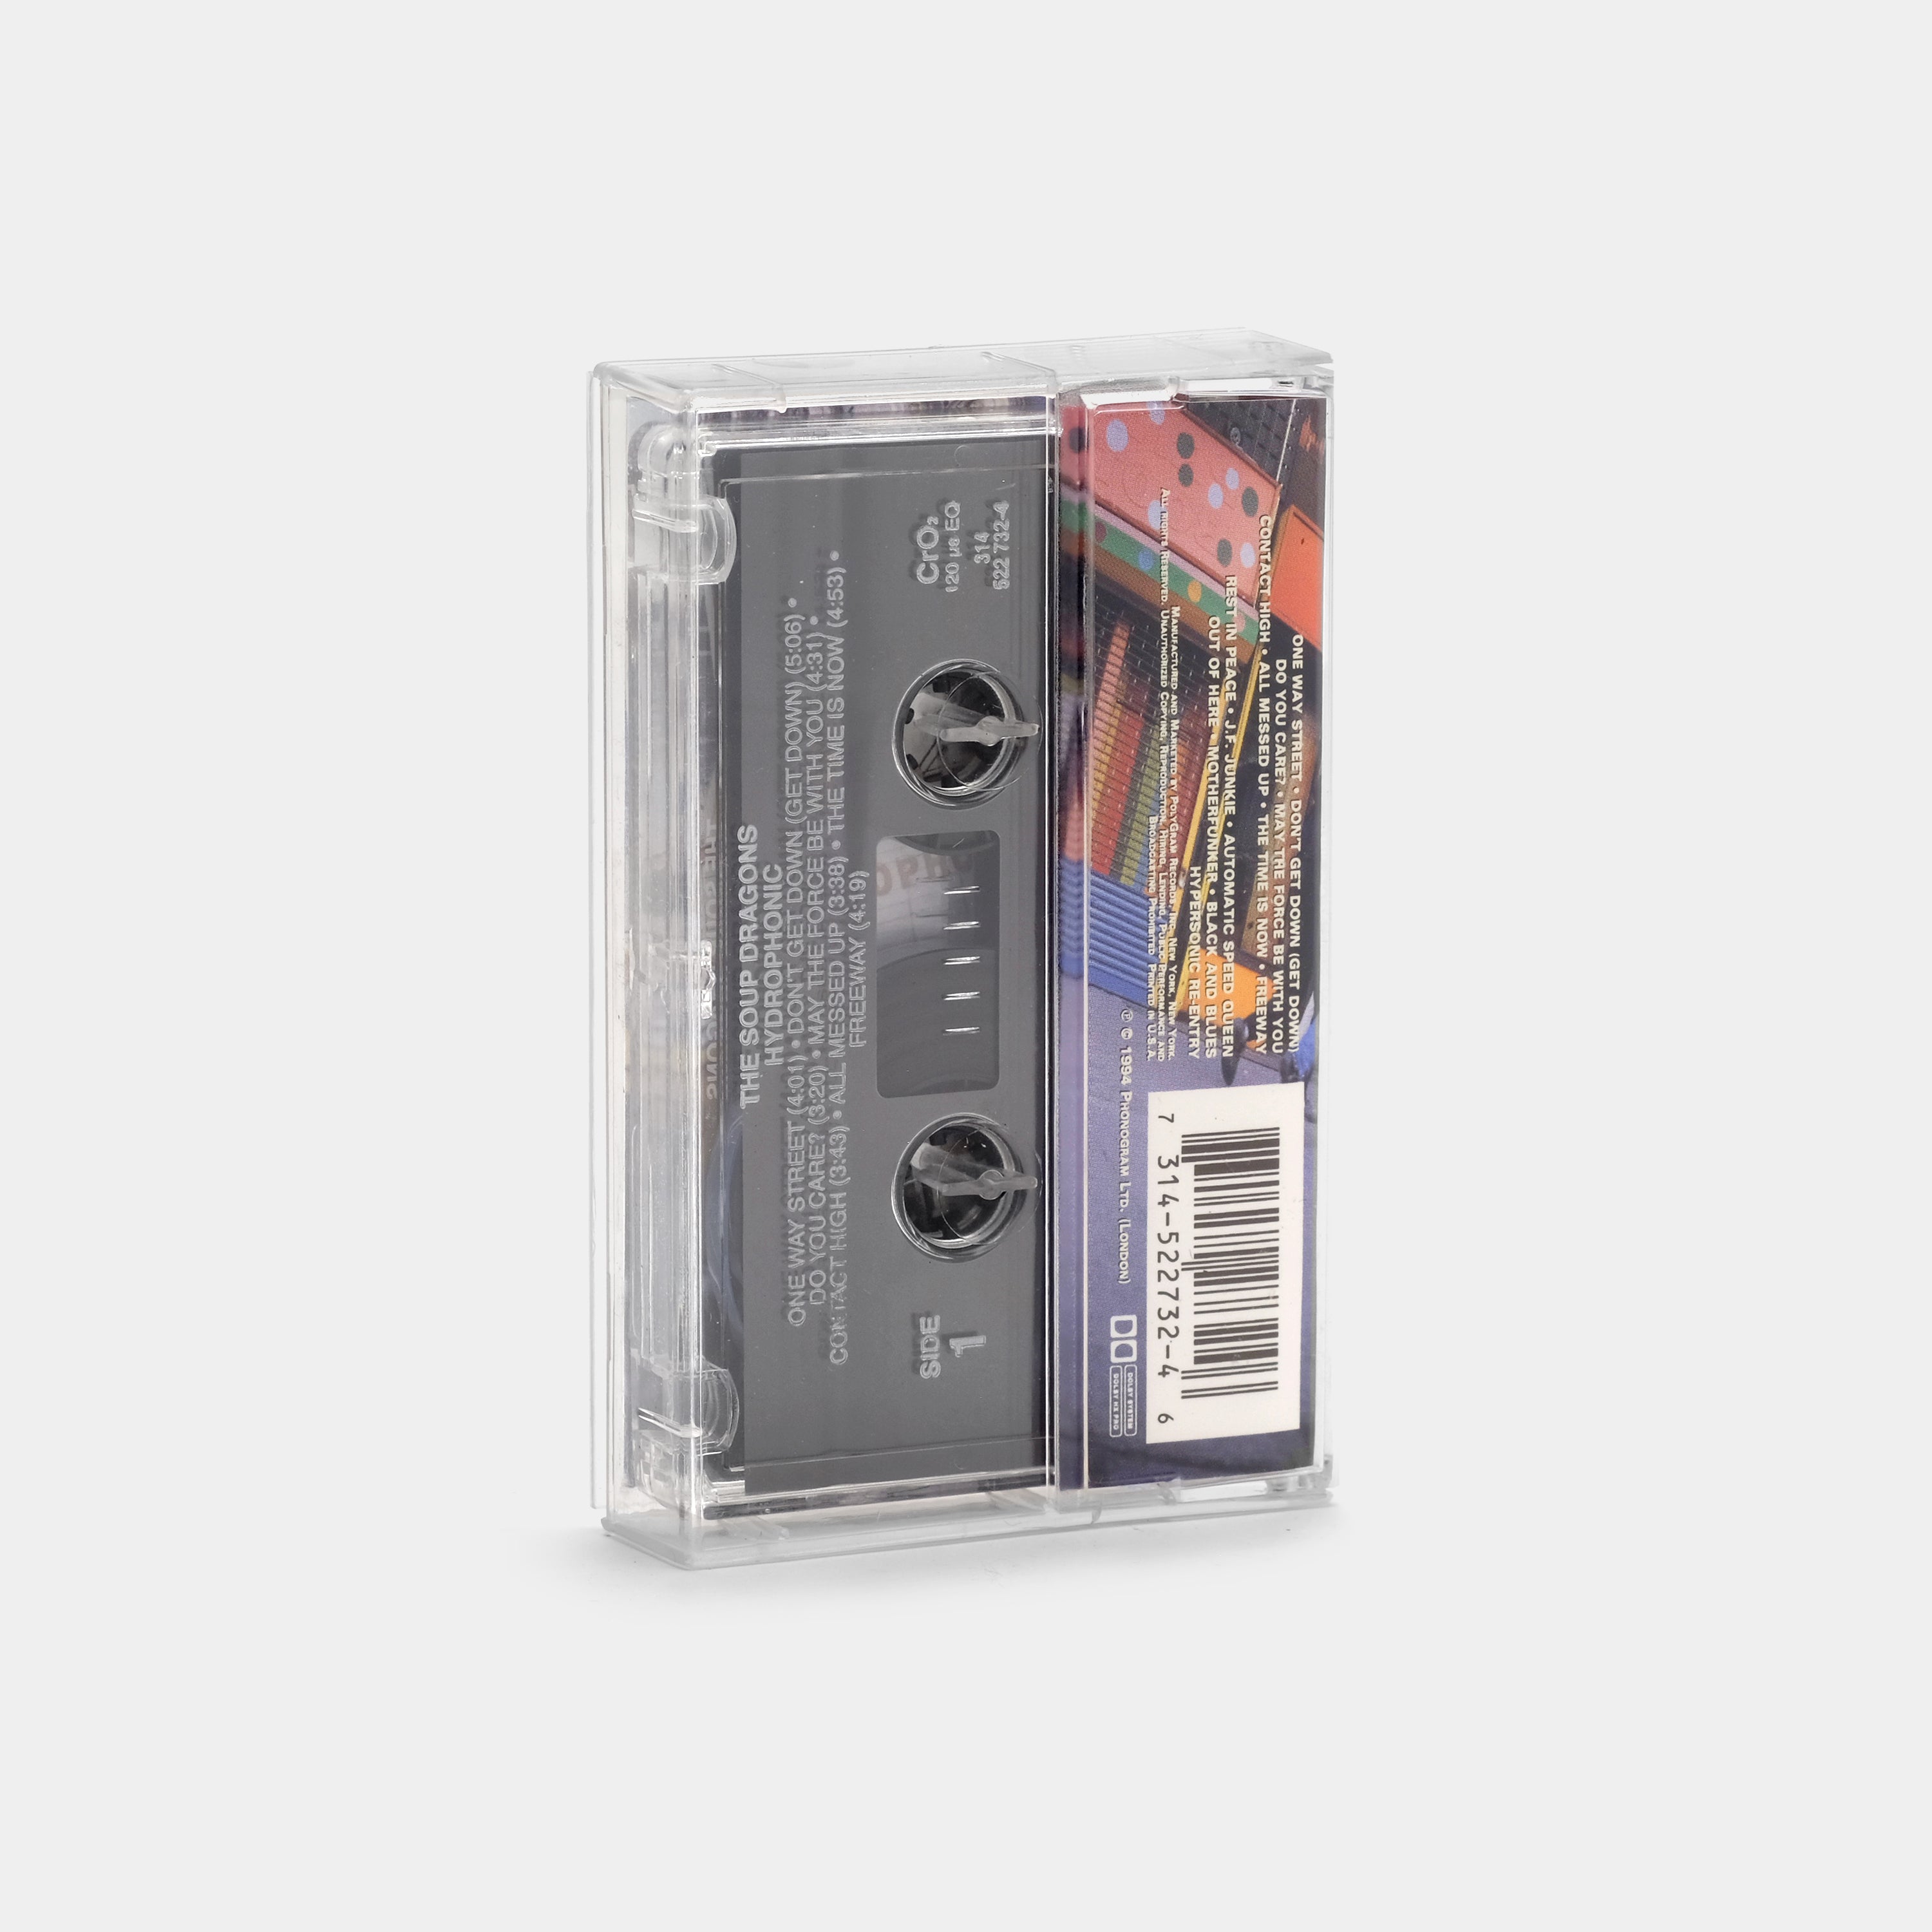 The Soup Dragons - Hydrophonic Cassette Tape